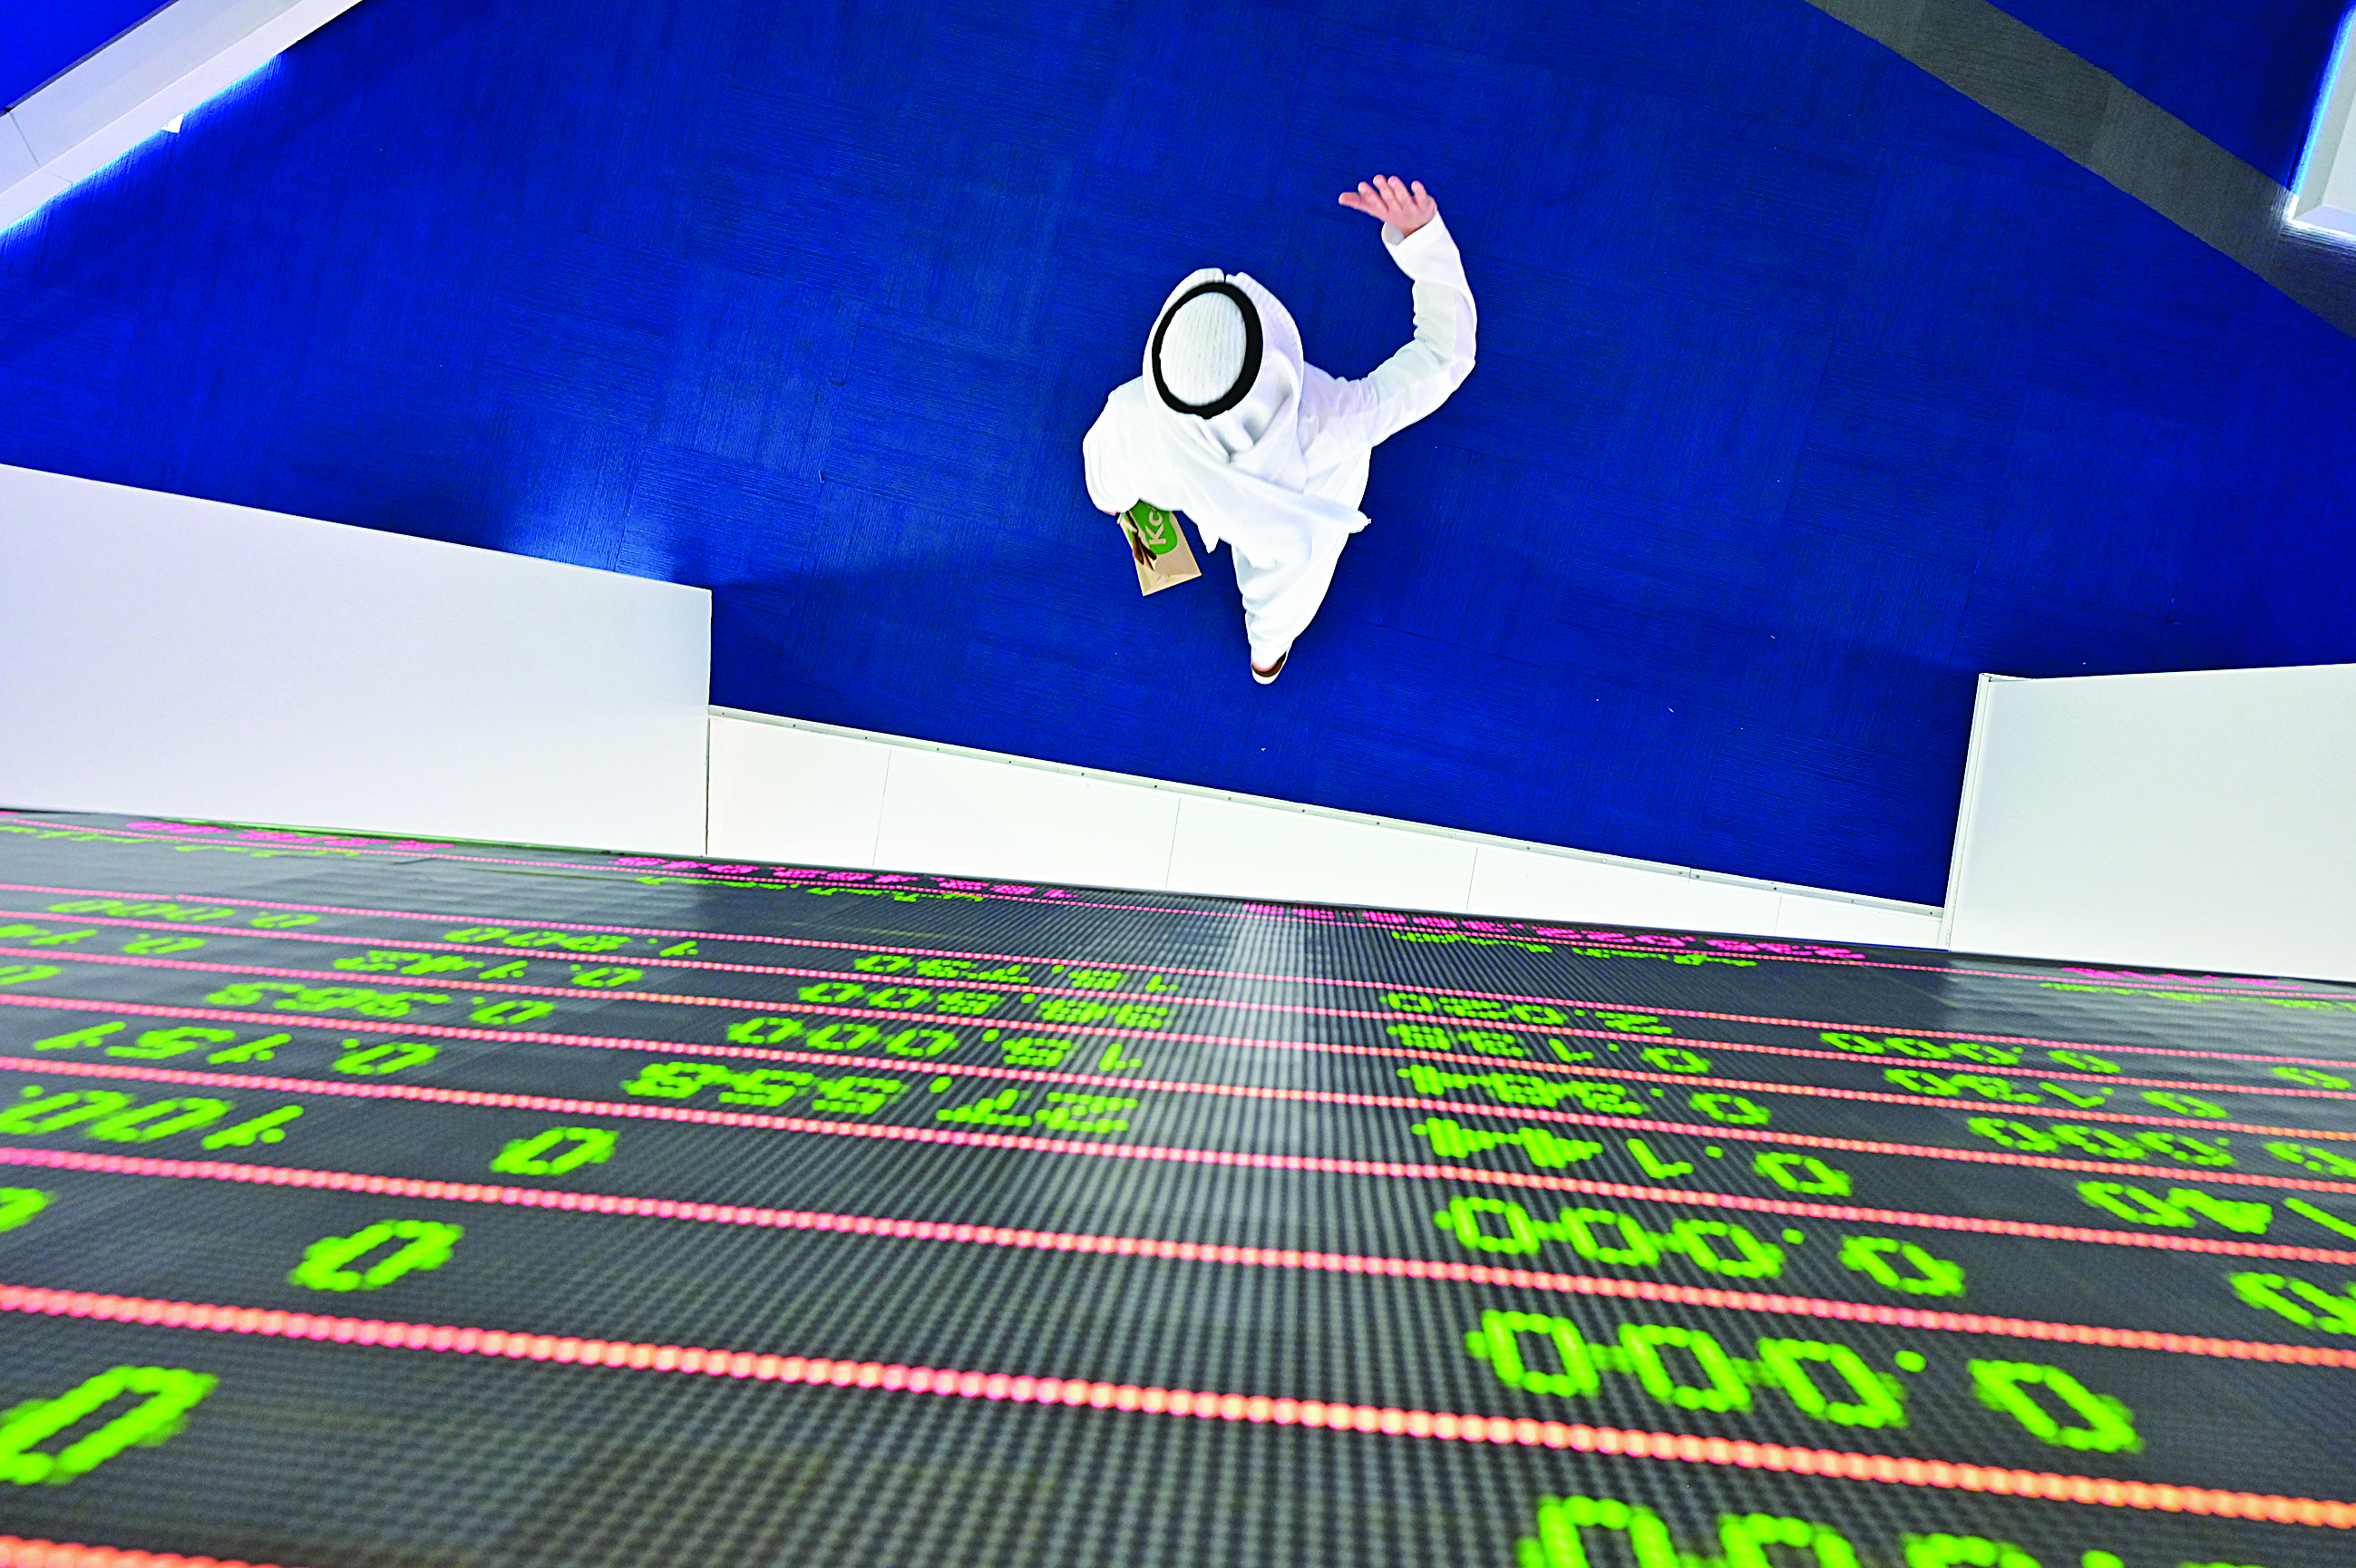 A trader walks by beneath a stock display board at the Dubai Stock Exchange in the United Arab Emirates, on March 8, 2020. - Saudi's stock exchange fell 6.5 percent and other Gulf markets tumbled to multi-year lows at the start of trading after OPEC and its allies failed to clinch a deal over oil production cuts. (Photo by GIUSEPPE CACACE / AFP)